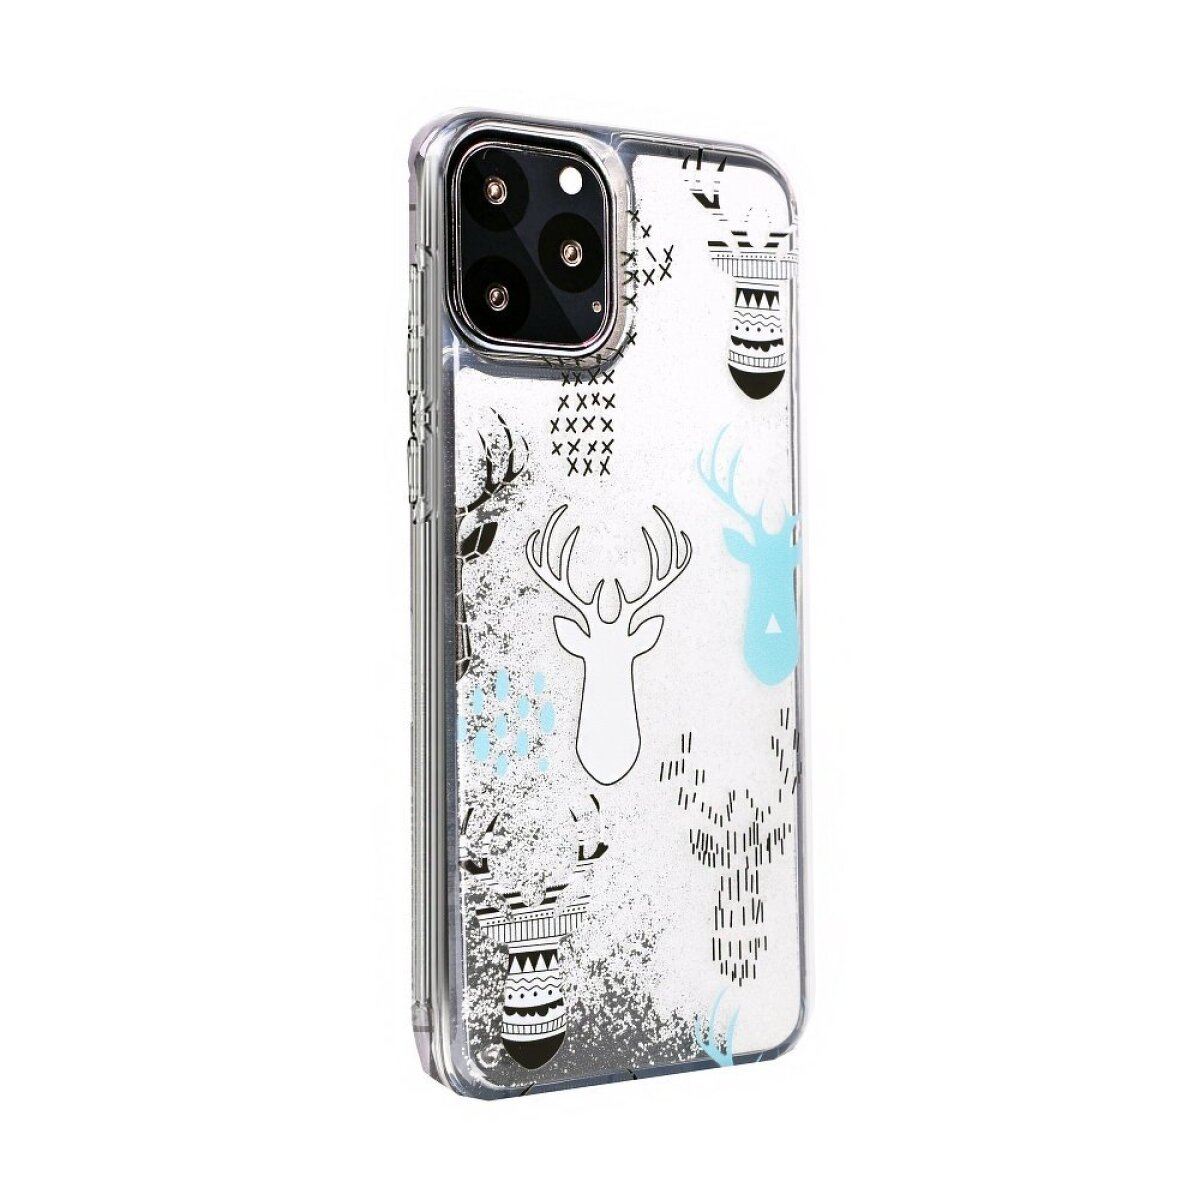 FORCELL Winter P Cover, Full Not Huawei, Smart P reindeers, 2019 2019, available smart